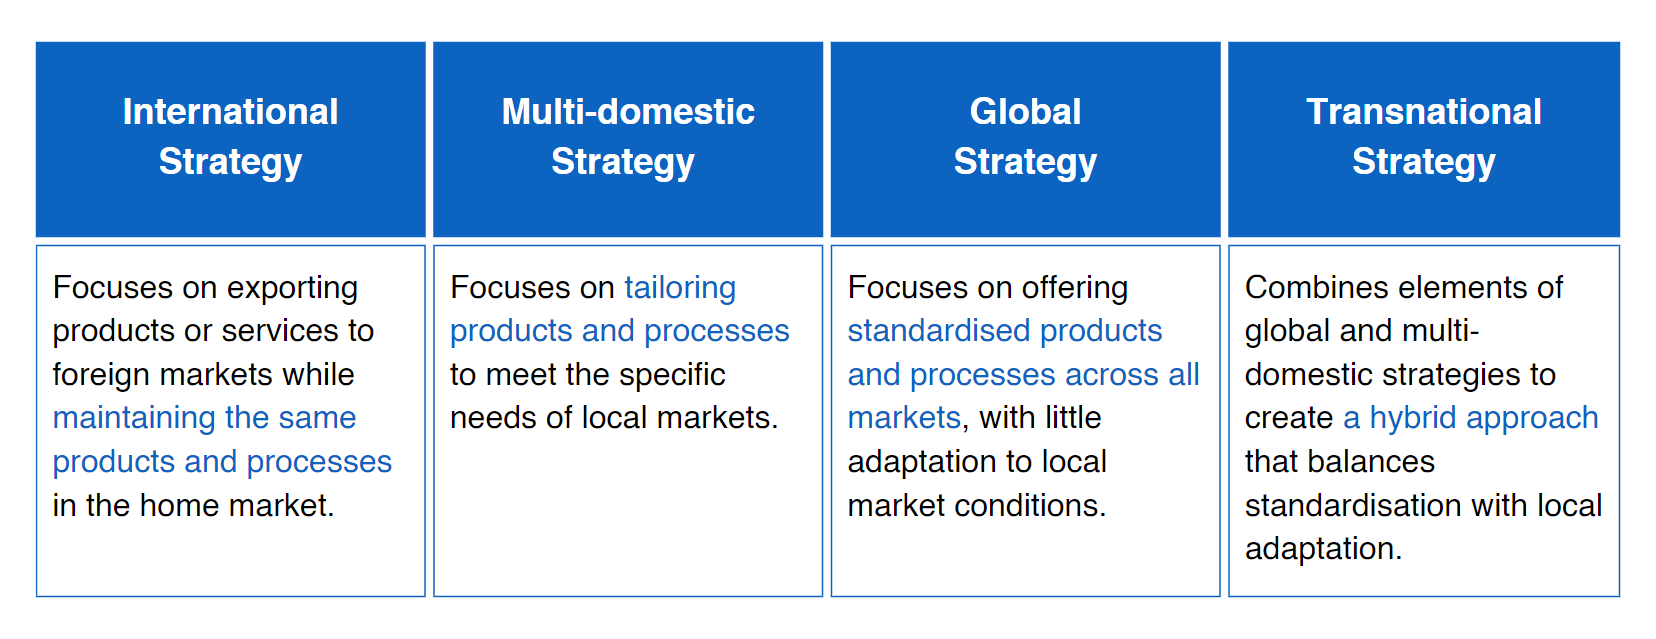  International Strategy   Multi-domestic strategy    Global strategy    Transnational strategy    Focuses on exporting products or services to foreign markets while maintaining the same products and processes in the home market.   Focuses on tailoring products and processes to meet the specific needs of local markets.   Focuses on offering standardised products and processes across all markets, with little adaptation to local market conditions.   Combines elements of global and multi-domestic strategies to create a hybrid approach that balances standardisation with local adaptation. 